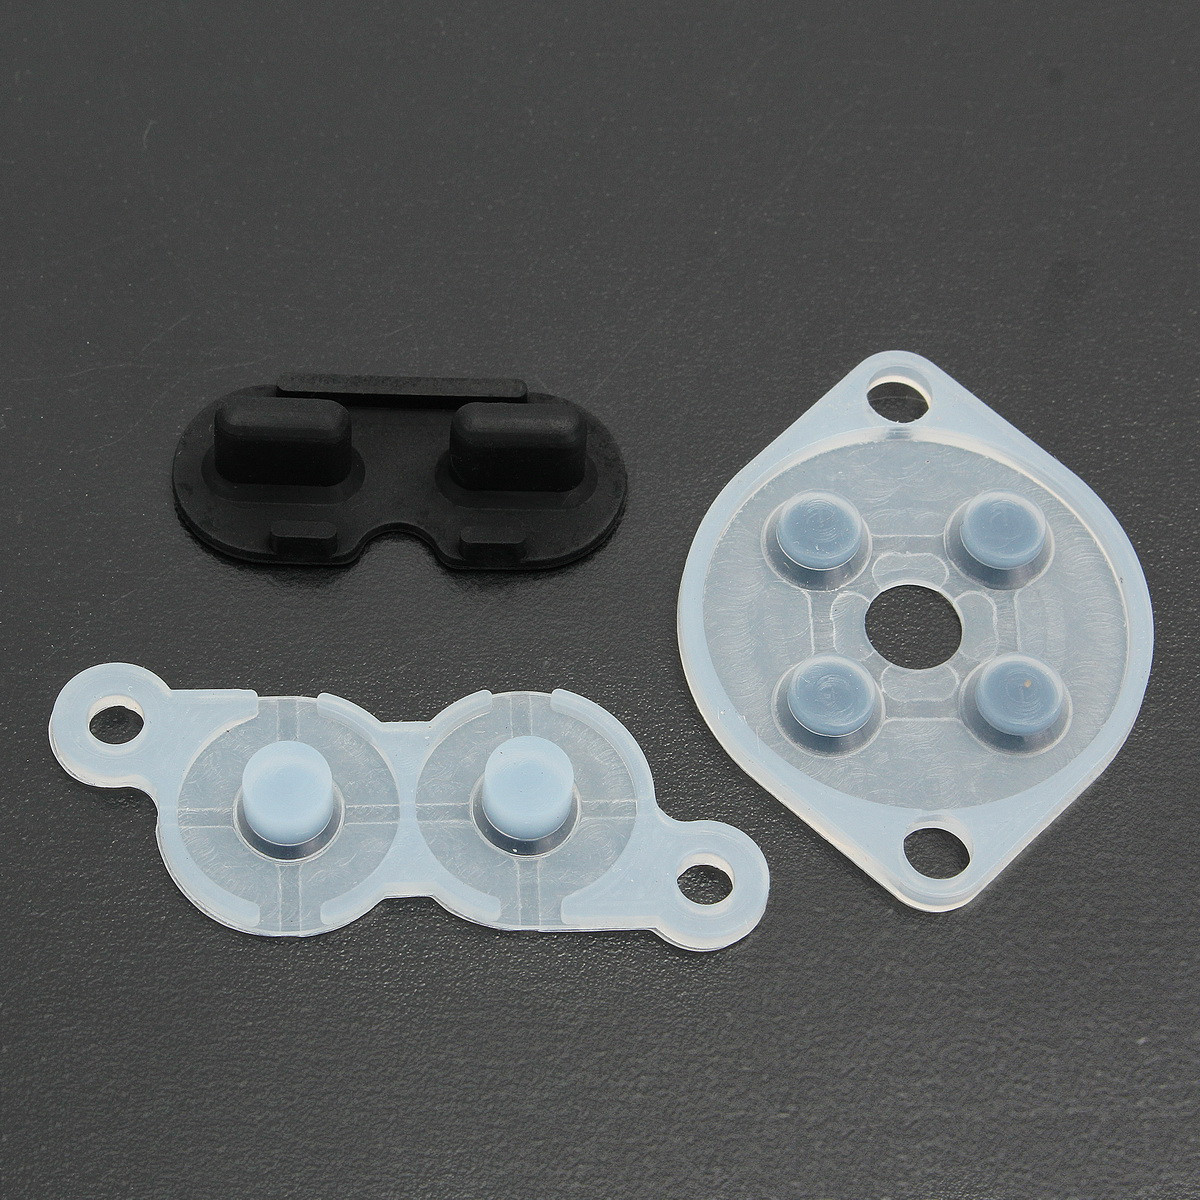 Silicon-Buttons-Replacement-Part-Rubber-for-Nintendo-NES-Game-Controller-Gamepad-1336659